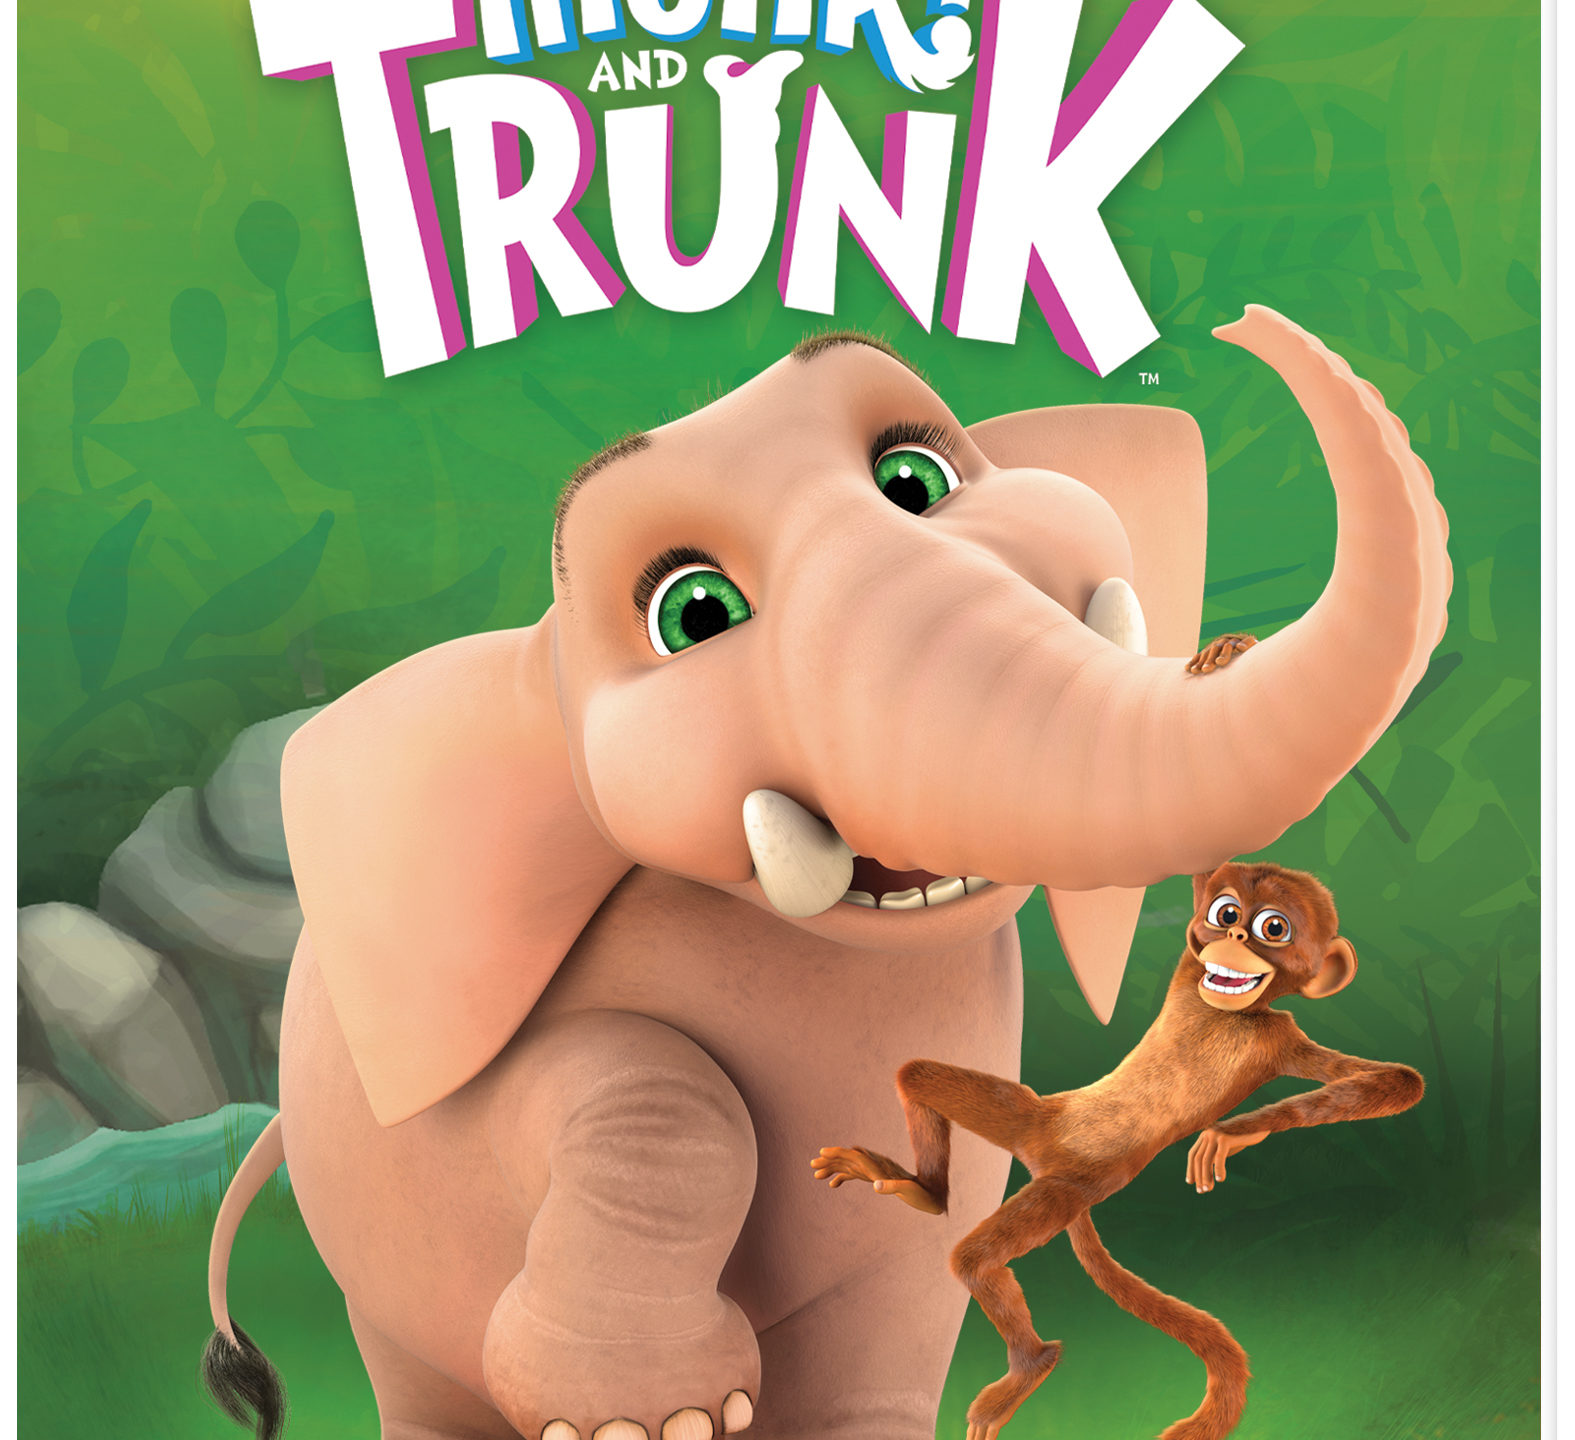 Jungle Fun with Munki and Trunk * Adorable selection of stories that teaches lessons about nature and friendship